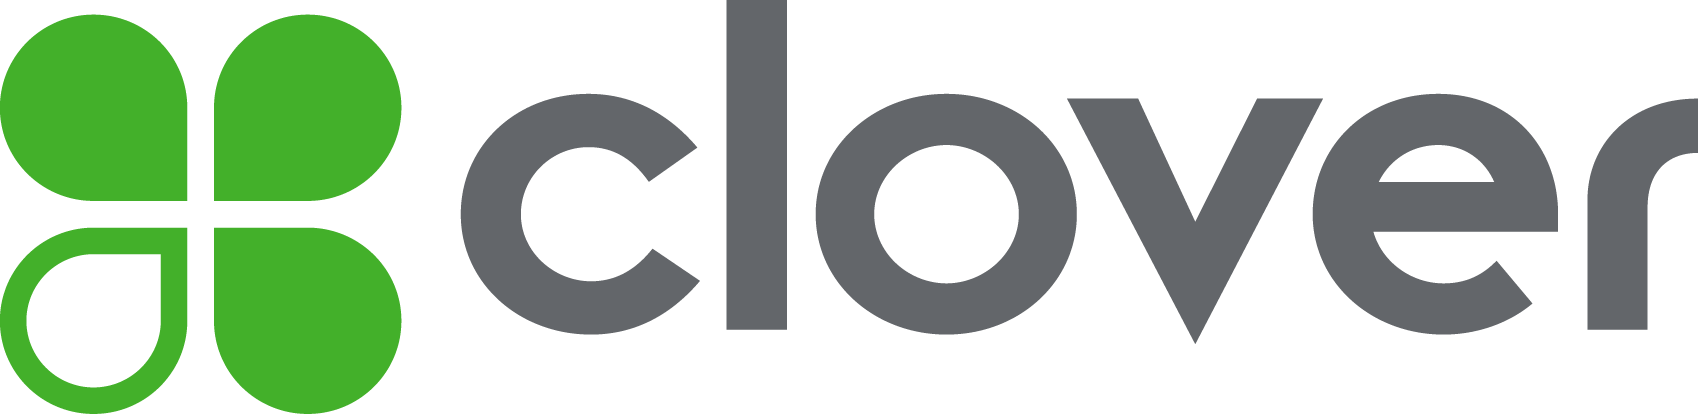 Clover Systems